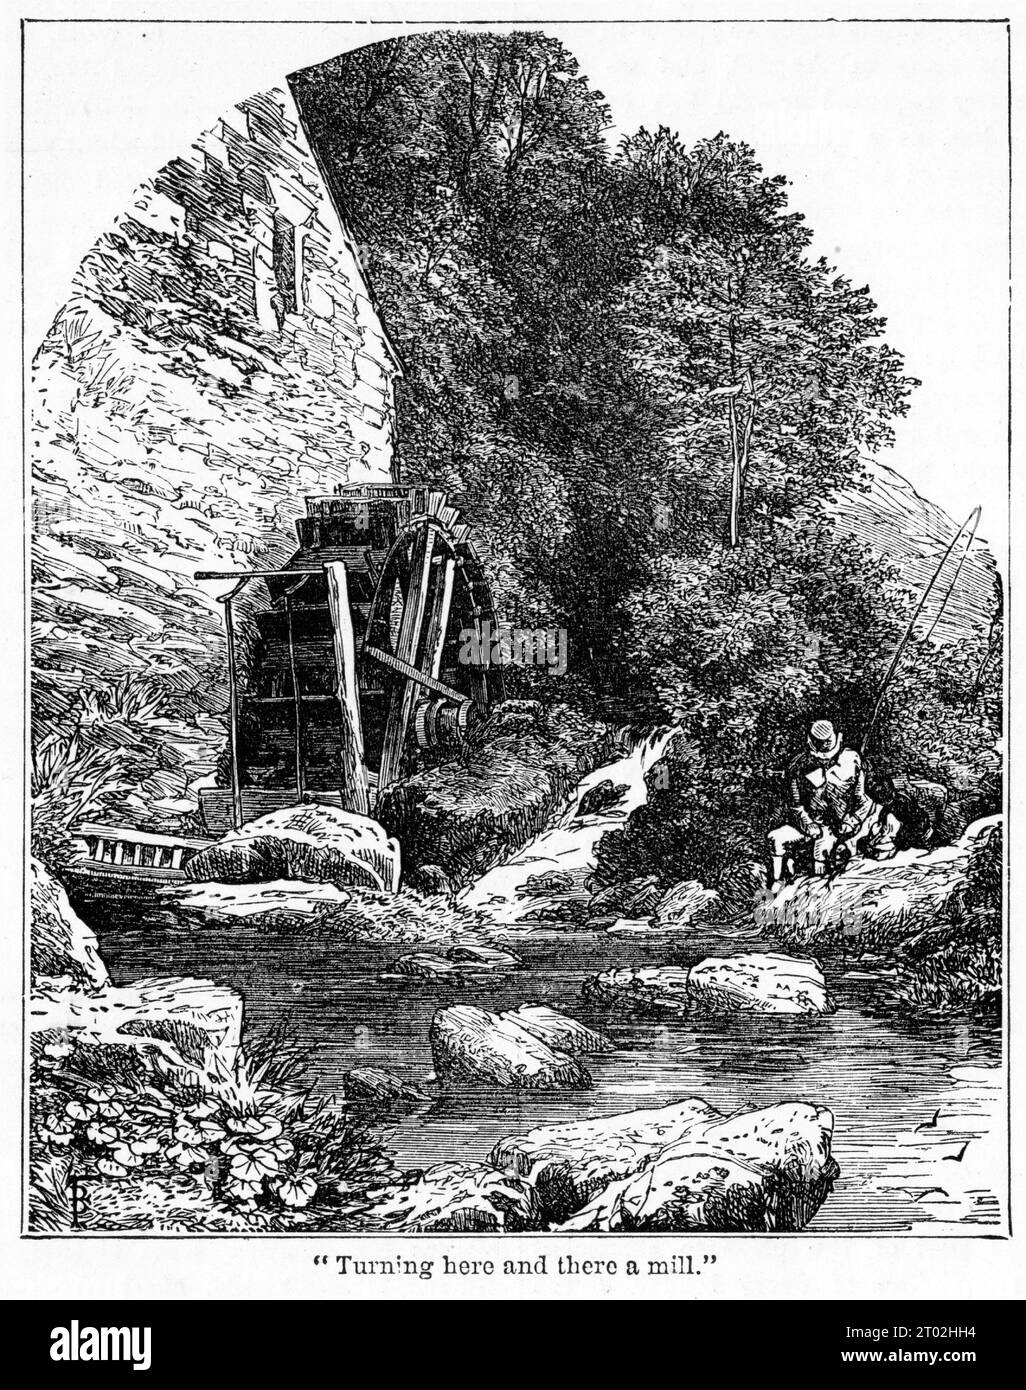 Engraving of an idyllic scene of a water mill in the countryside, circa 1880 Stock Photo